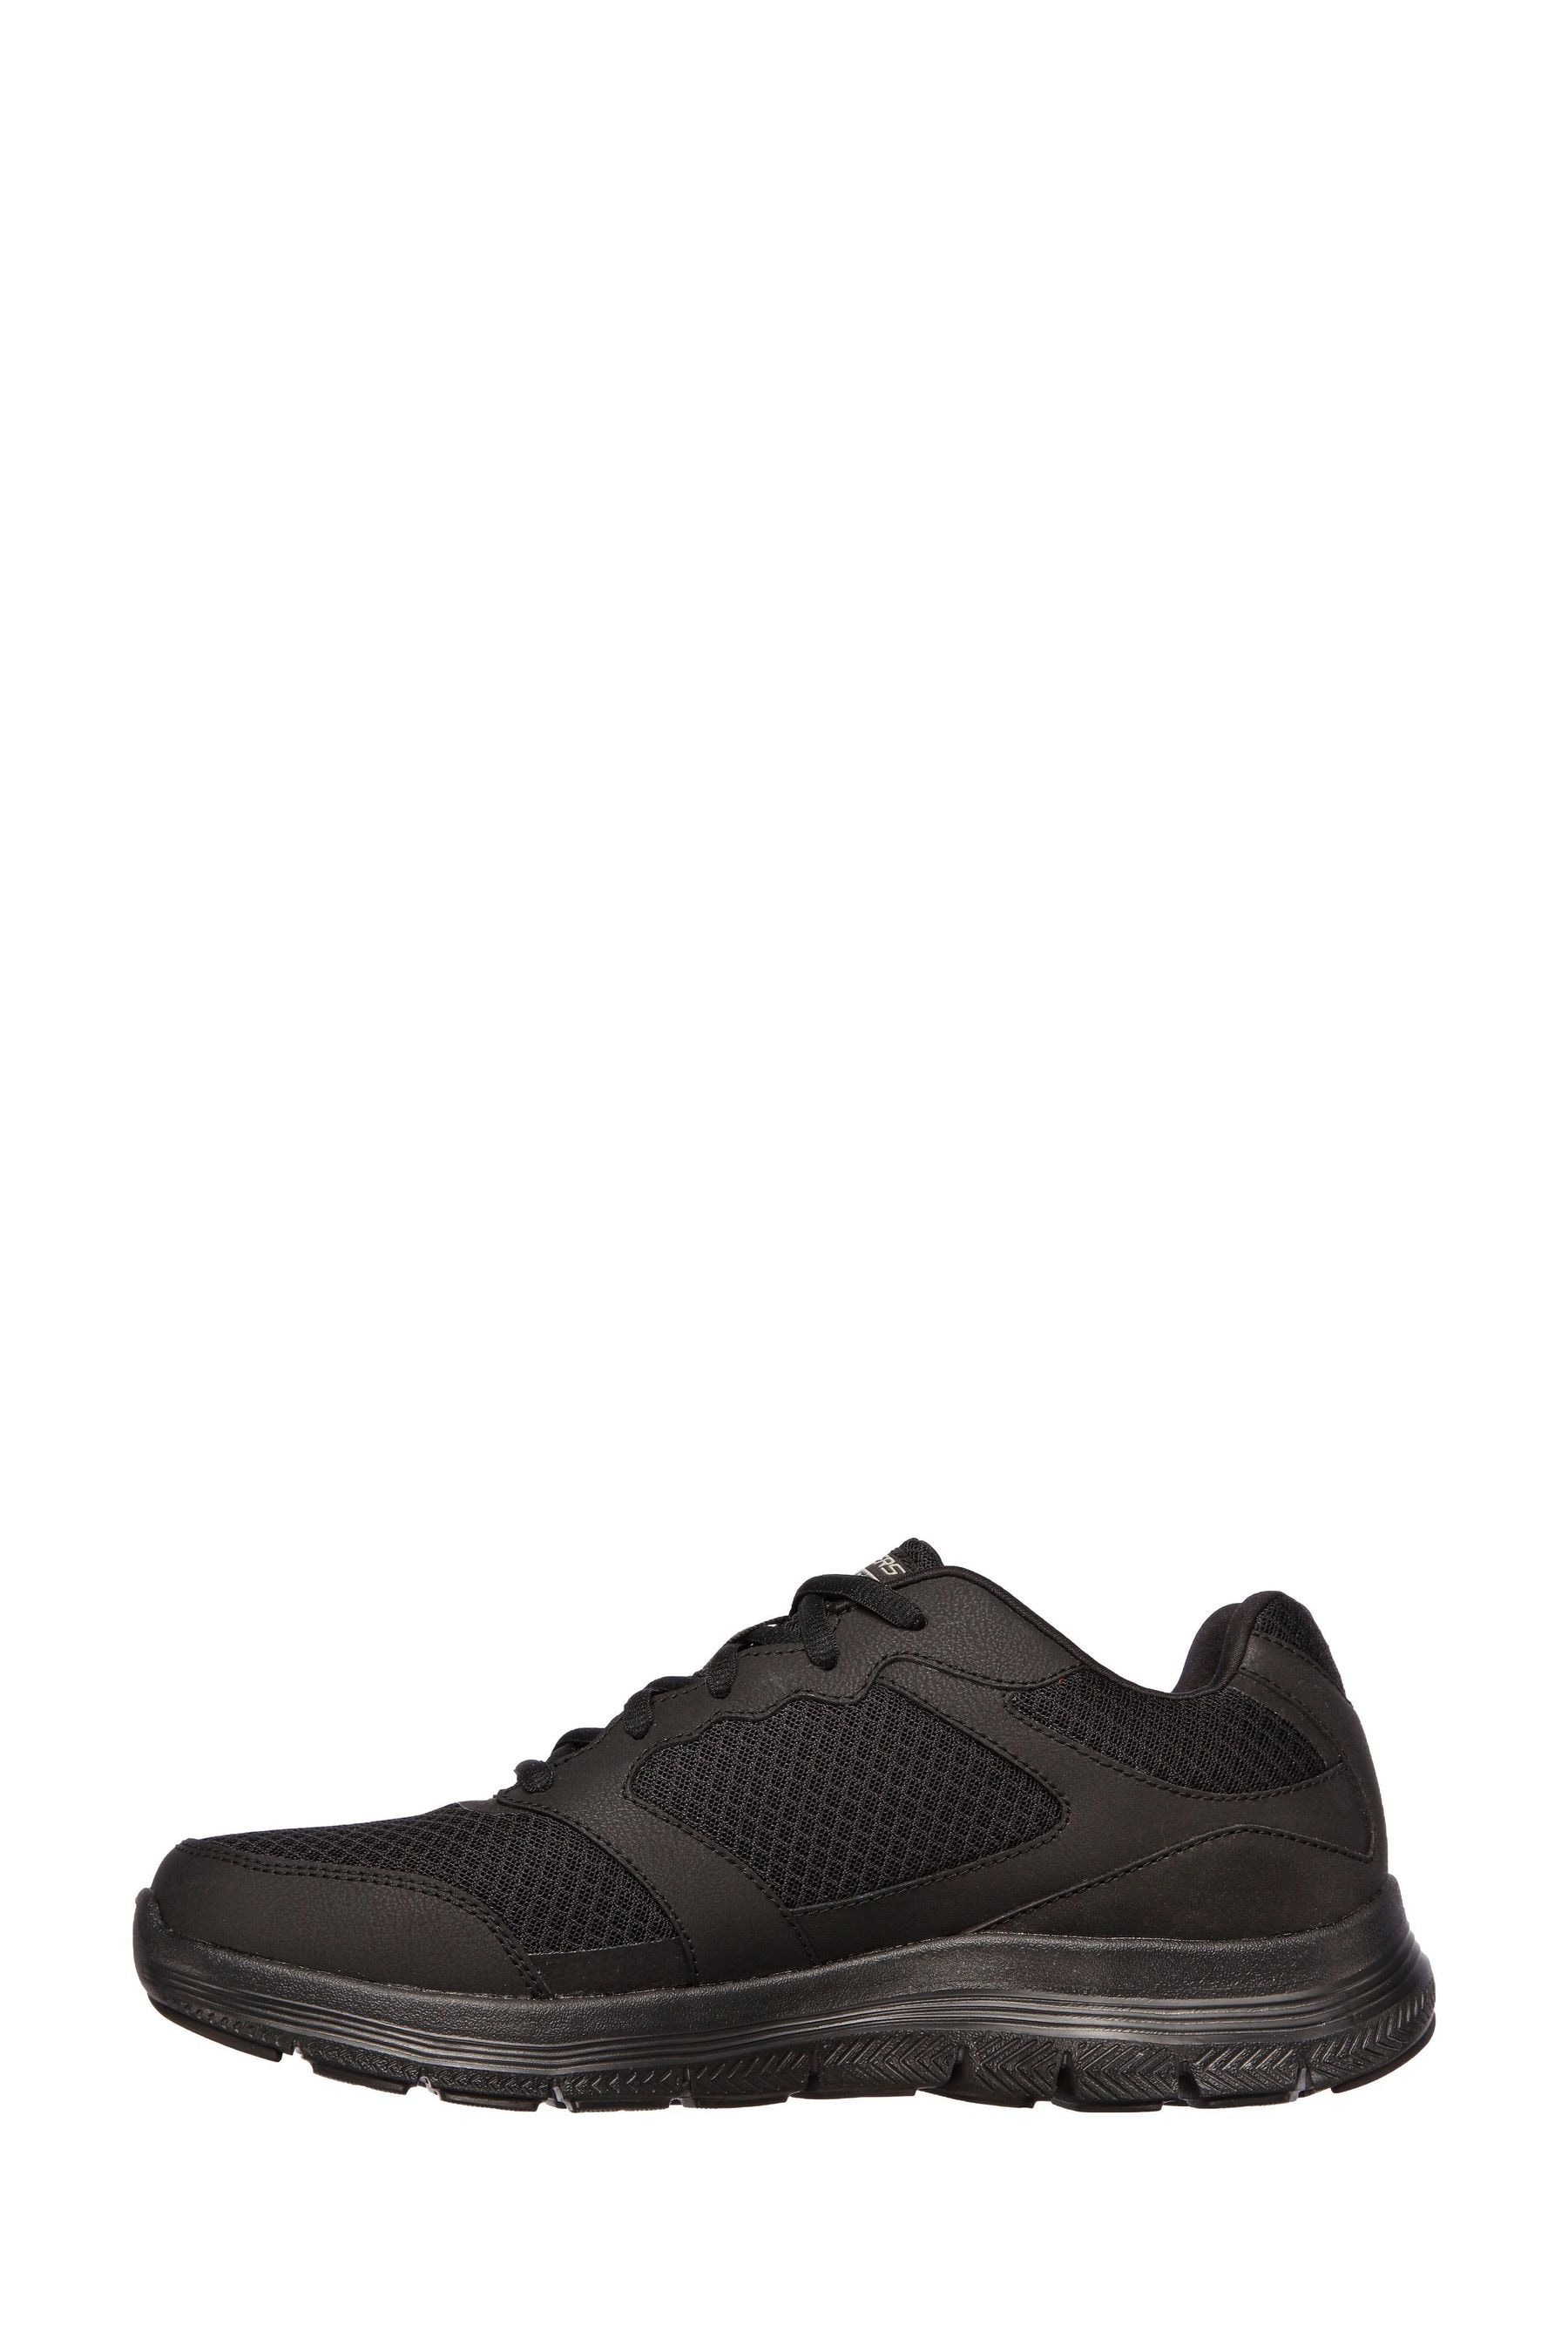 Buy Skechers Black Flex Advantage 4.0 Mens Trainers from the Next UK ...